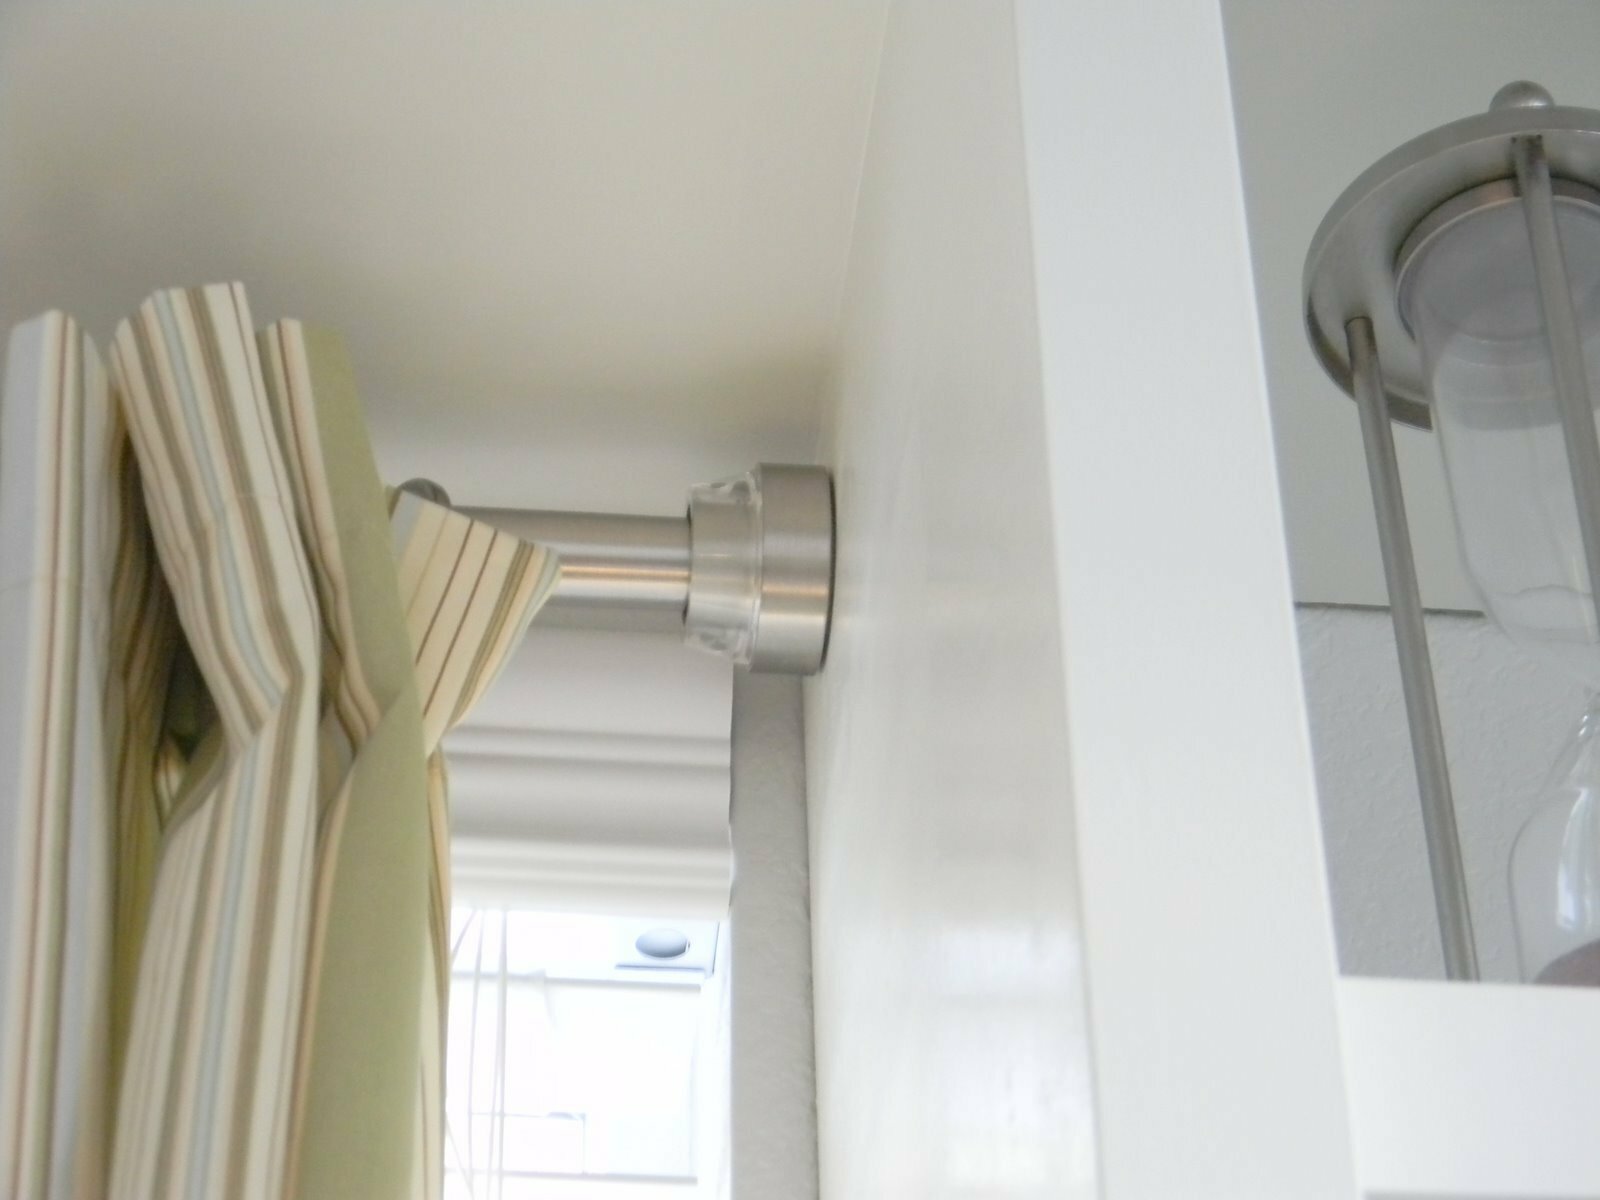 Curtain Shower Rods | Shower Curtain Pole Curved | Shower Curtain Tension Rod